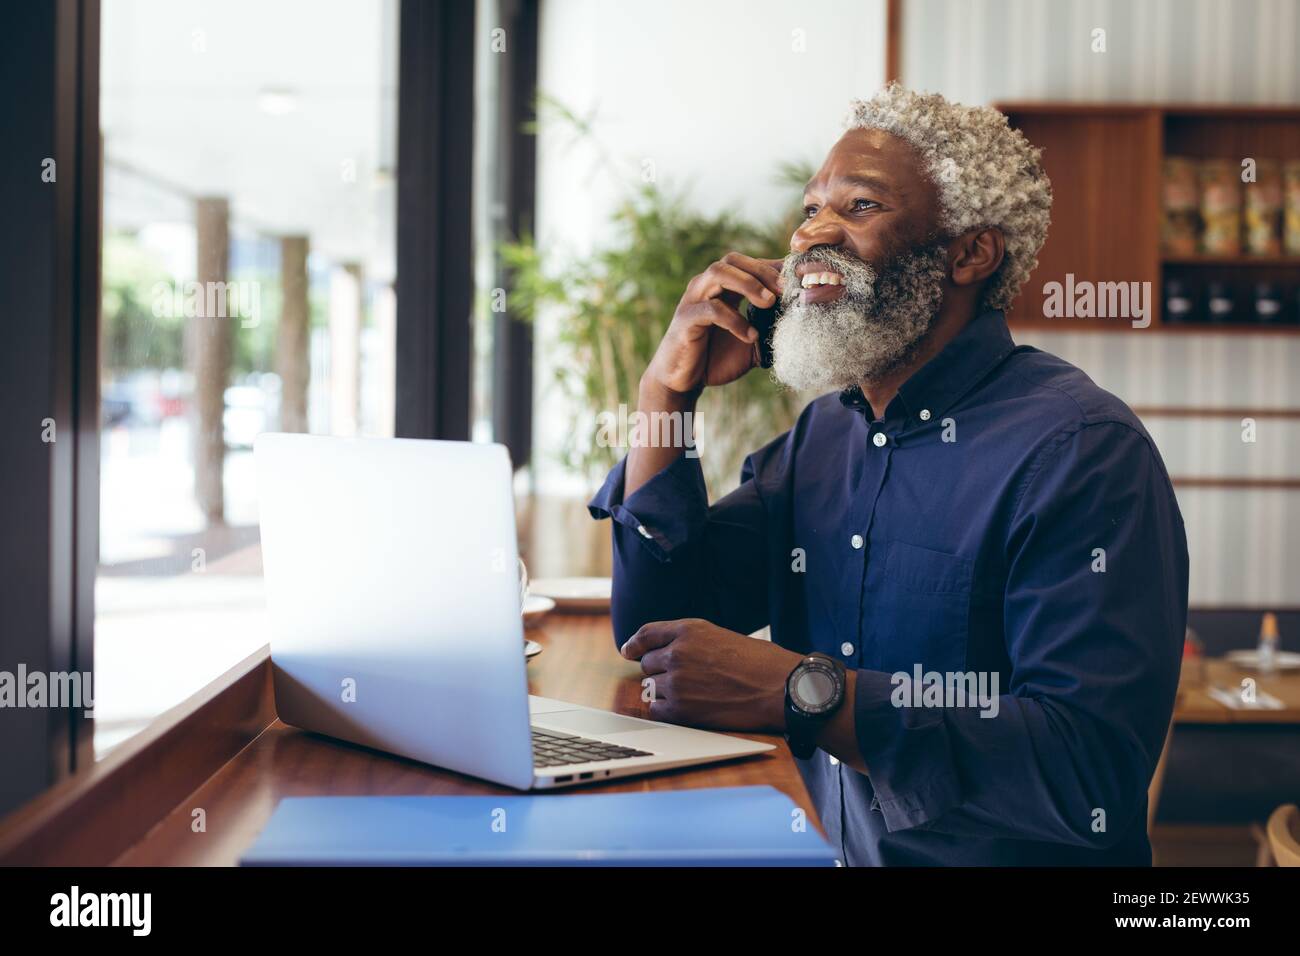 African american senior man sitting at table in cafe using laptop talking on smartphone and smiling Stock Photo